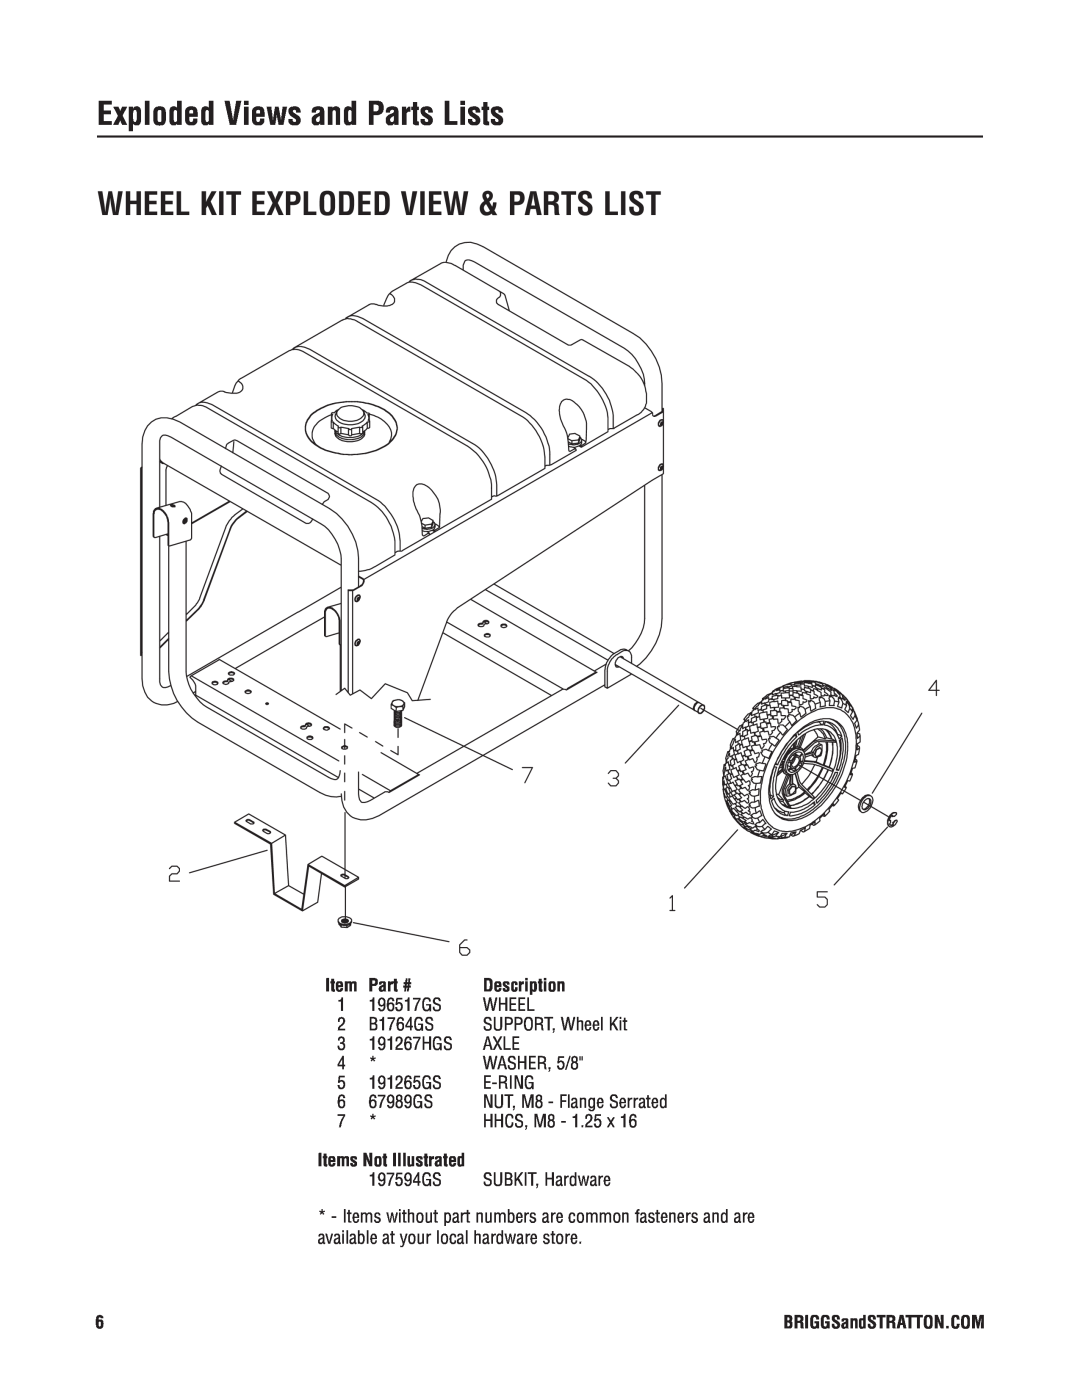 Briggs & Stratton 30424 manual Wheel Kit Exploded View & Parts List, Items Not Illustrated, Exploded Views and Parts Lists 